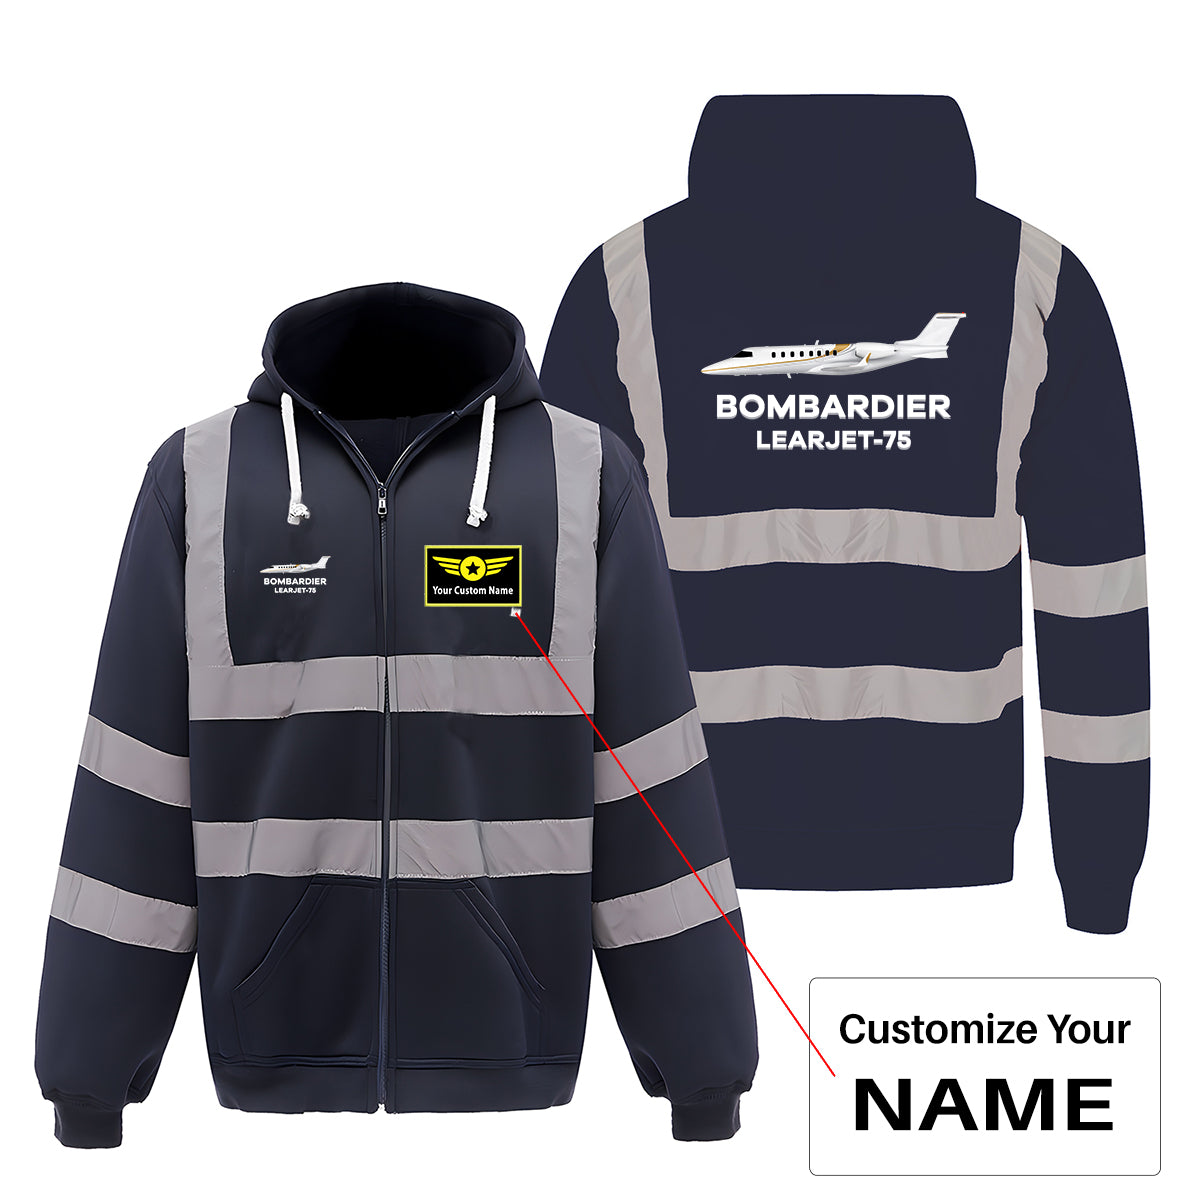 The Bombardier Learjet 75 Designed Reflective Zipped Hoodies